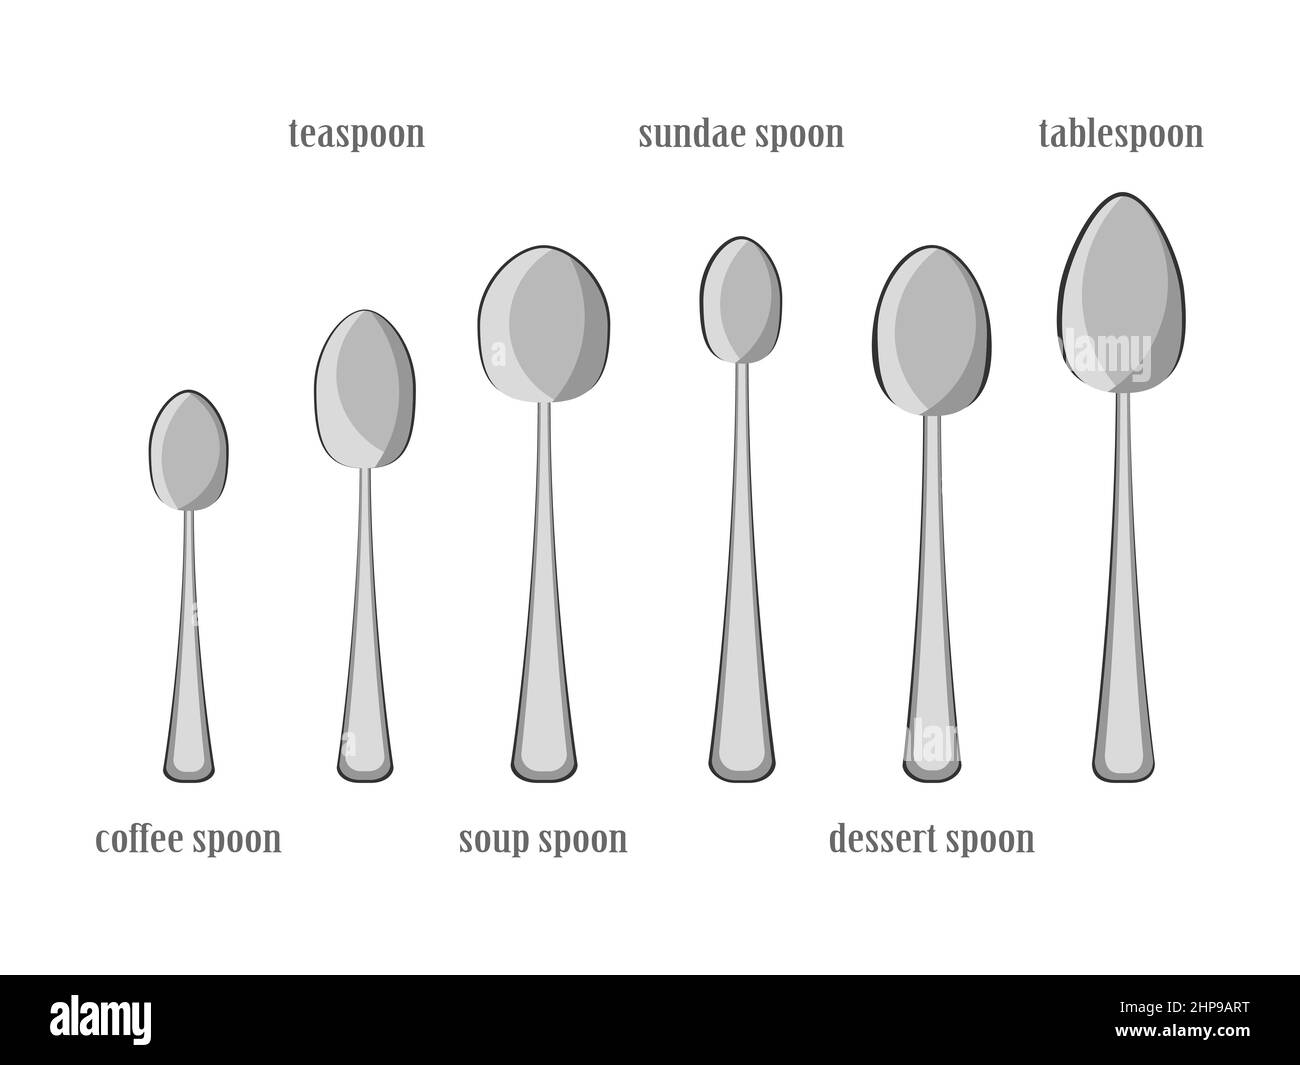 Cartoon kitchen colection spoons. Coffee spoon, teaspoon, soup spoon, ice cream spoon, dessert spoon, tablespoon. Eating utensils icons elements isolated on white background, flat vector illustration Stock Vector